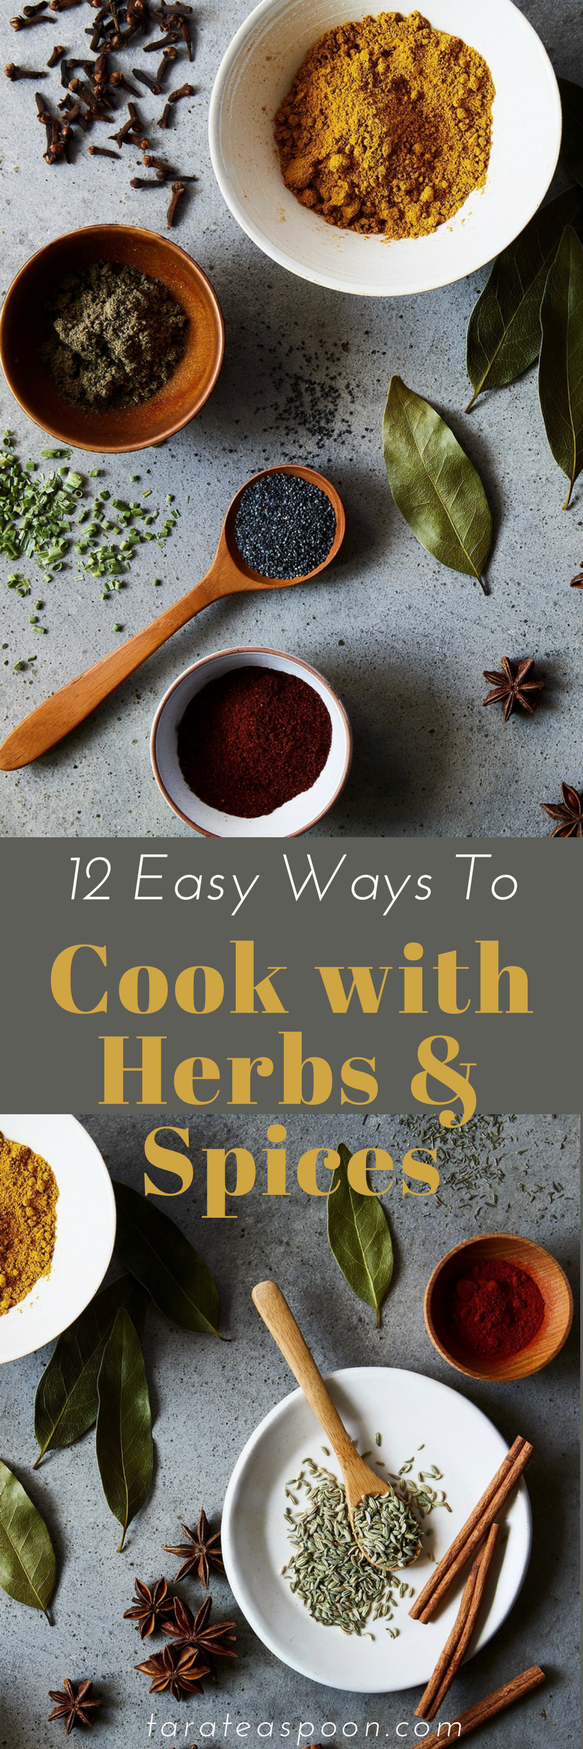 12 easy ways to cook with herbs and spices pin